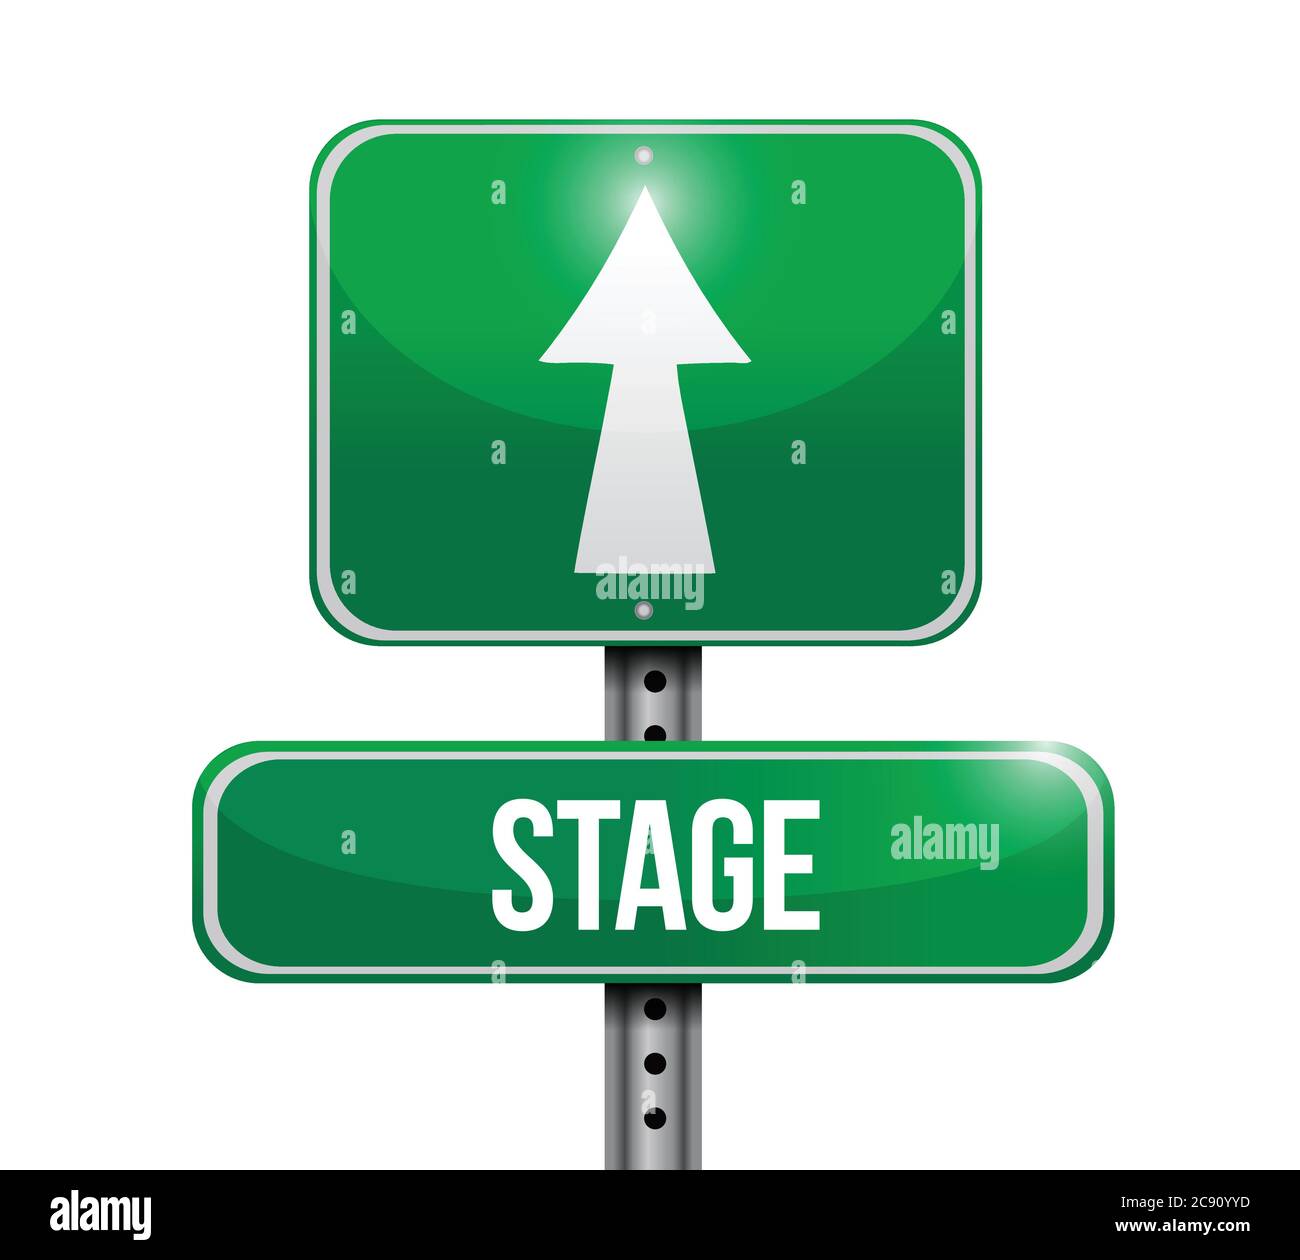 Stage road sign illustrations design over a white background Stock Vector